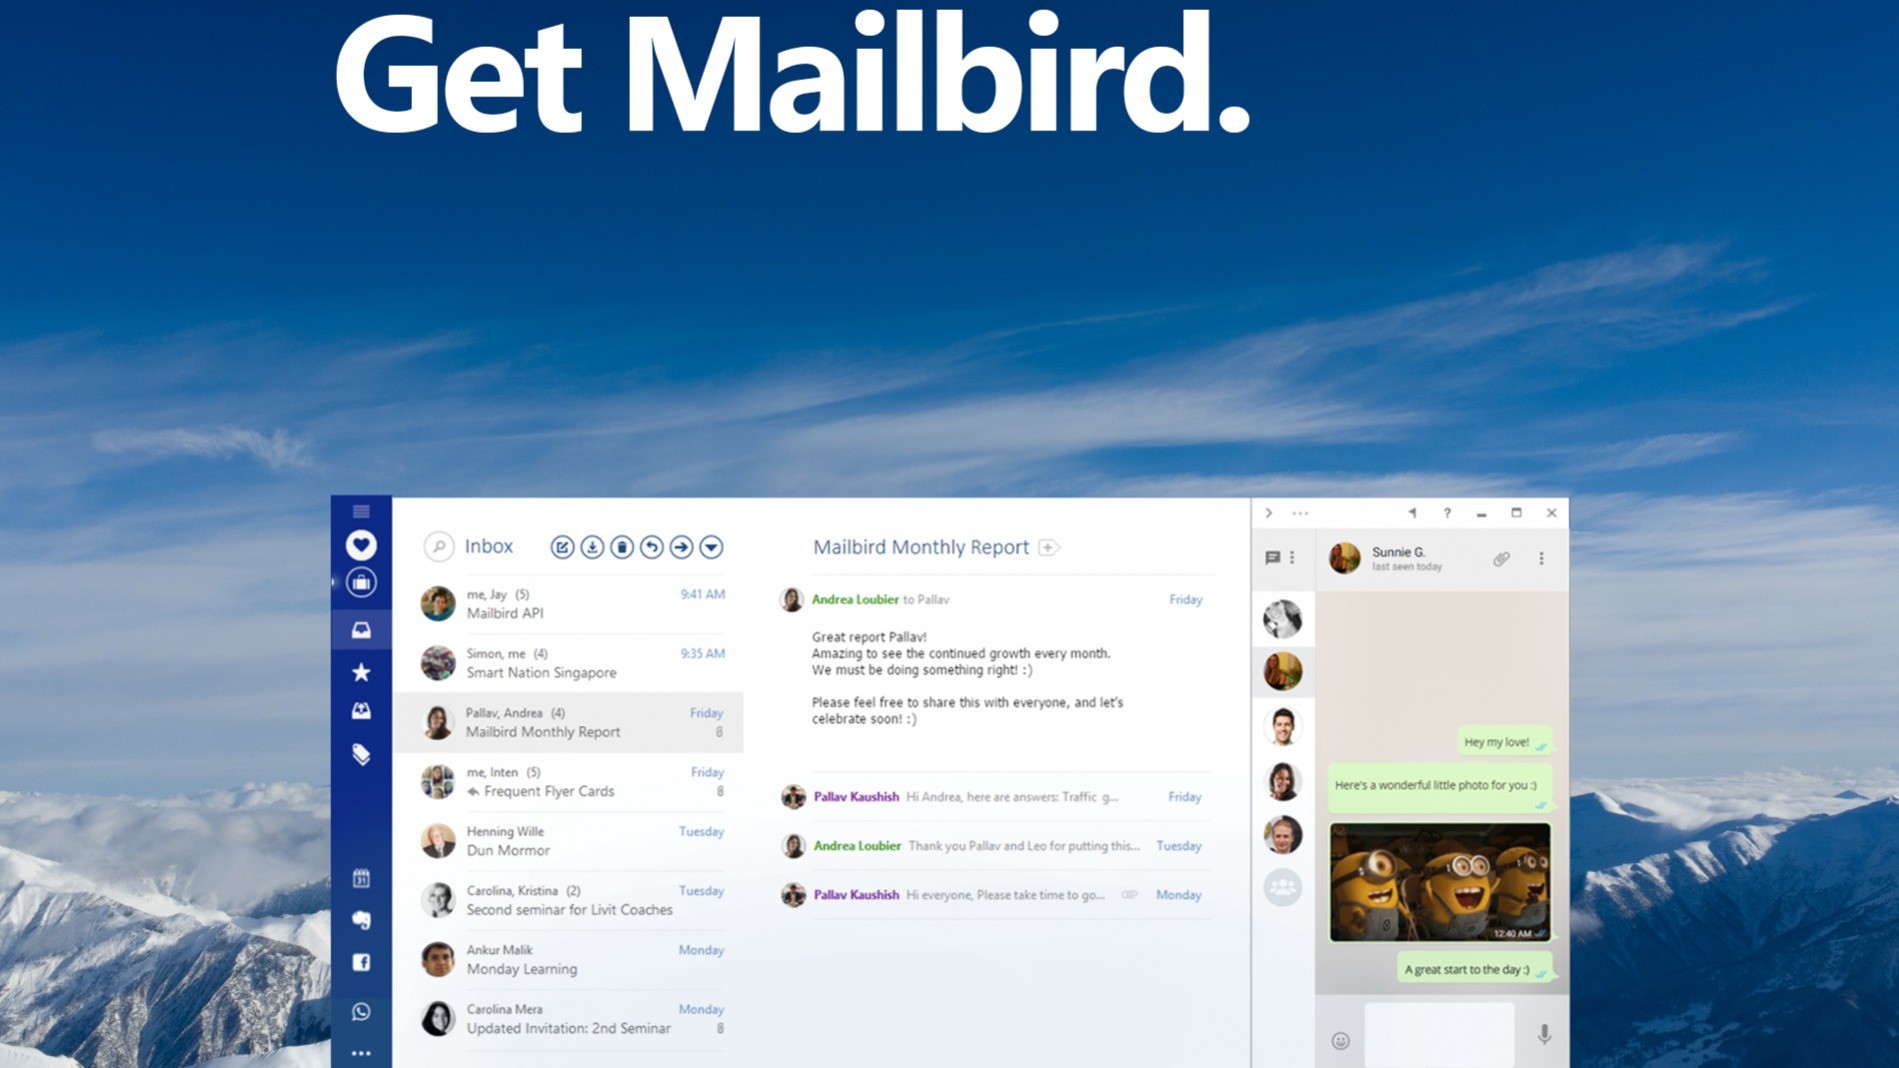 mailbird images are thumbnails